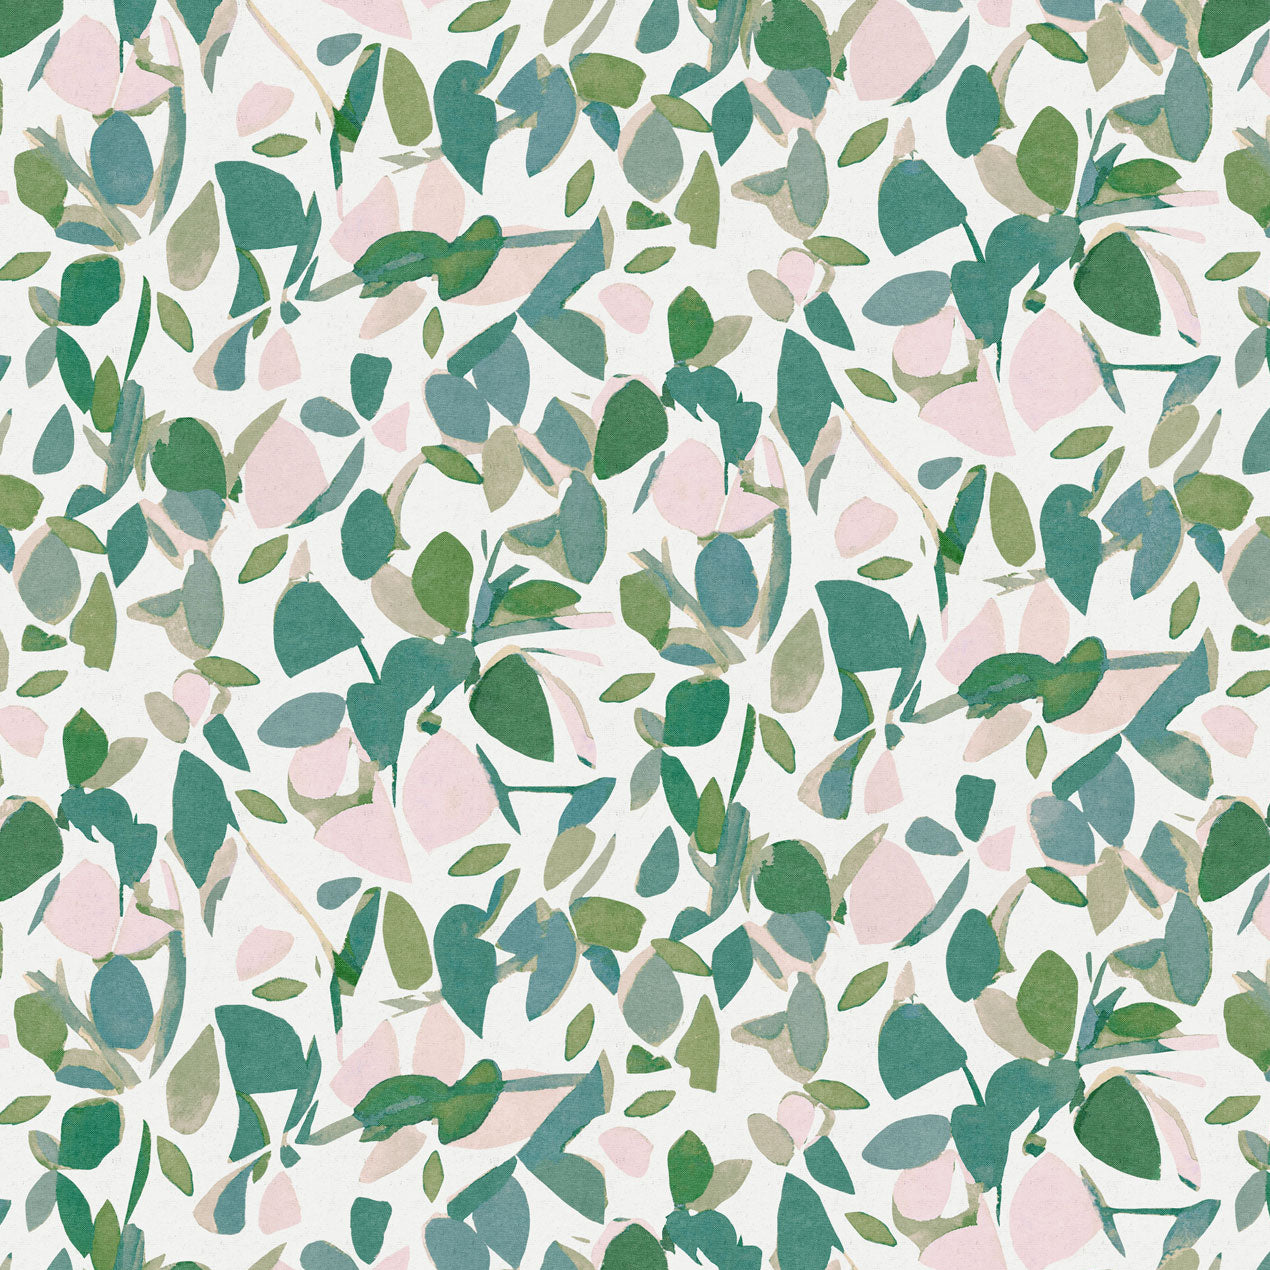 Detail of fabric in a minimal leaf print in shades of blue, green and pink on a white field.